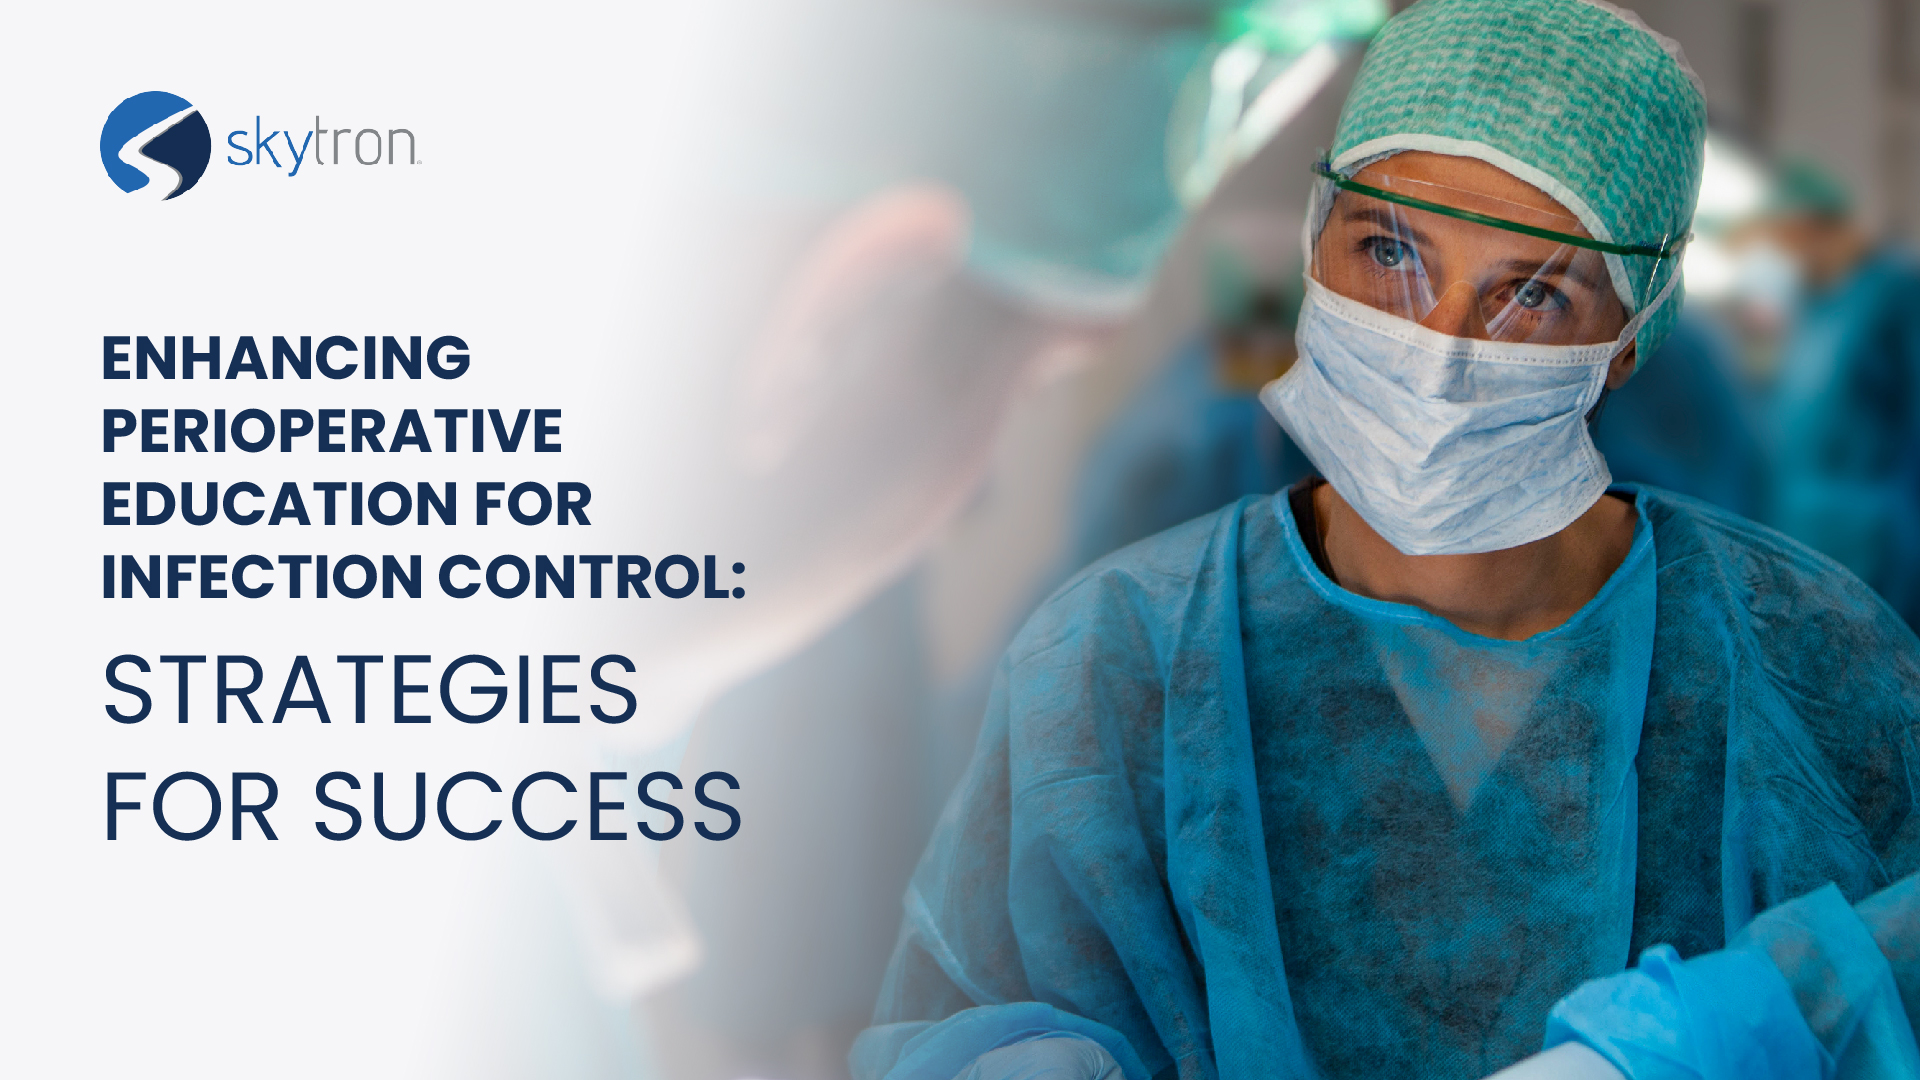 Enhancing Perioperative Education for Infection Control: Strategies for Success